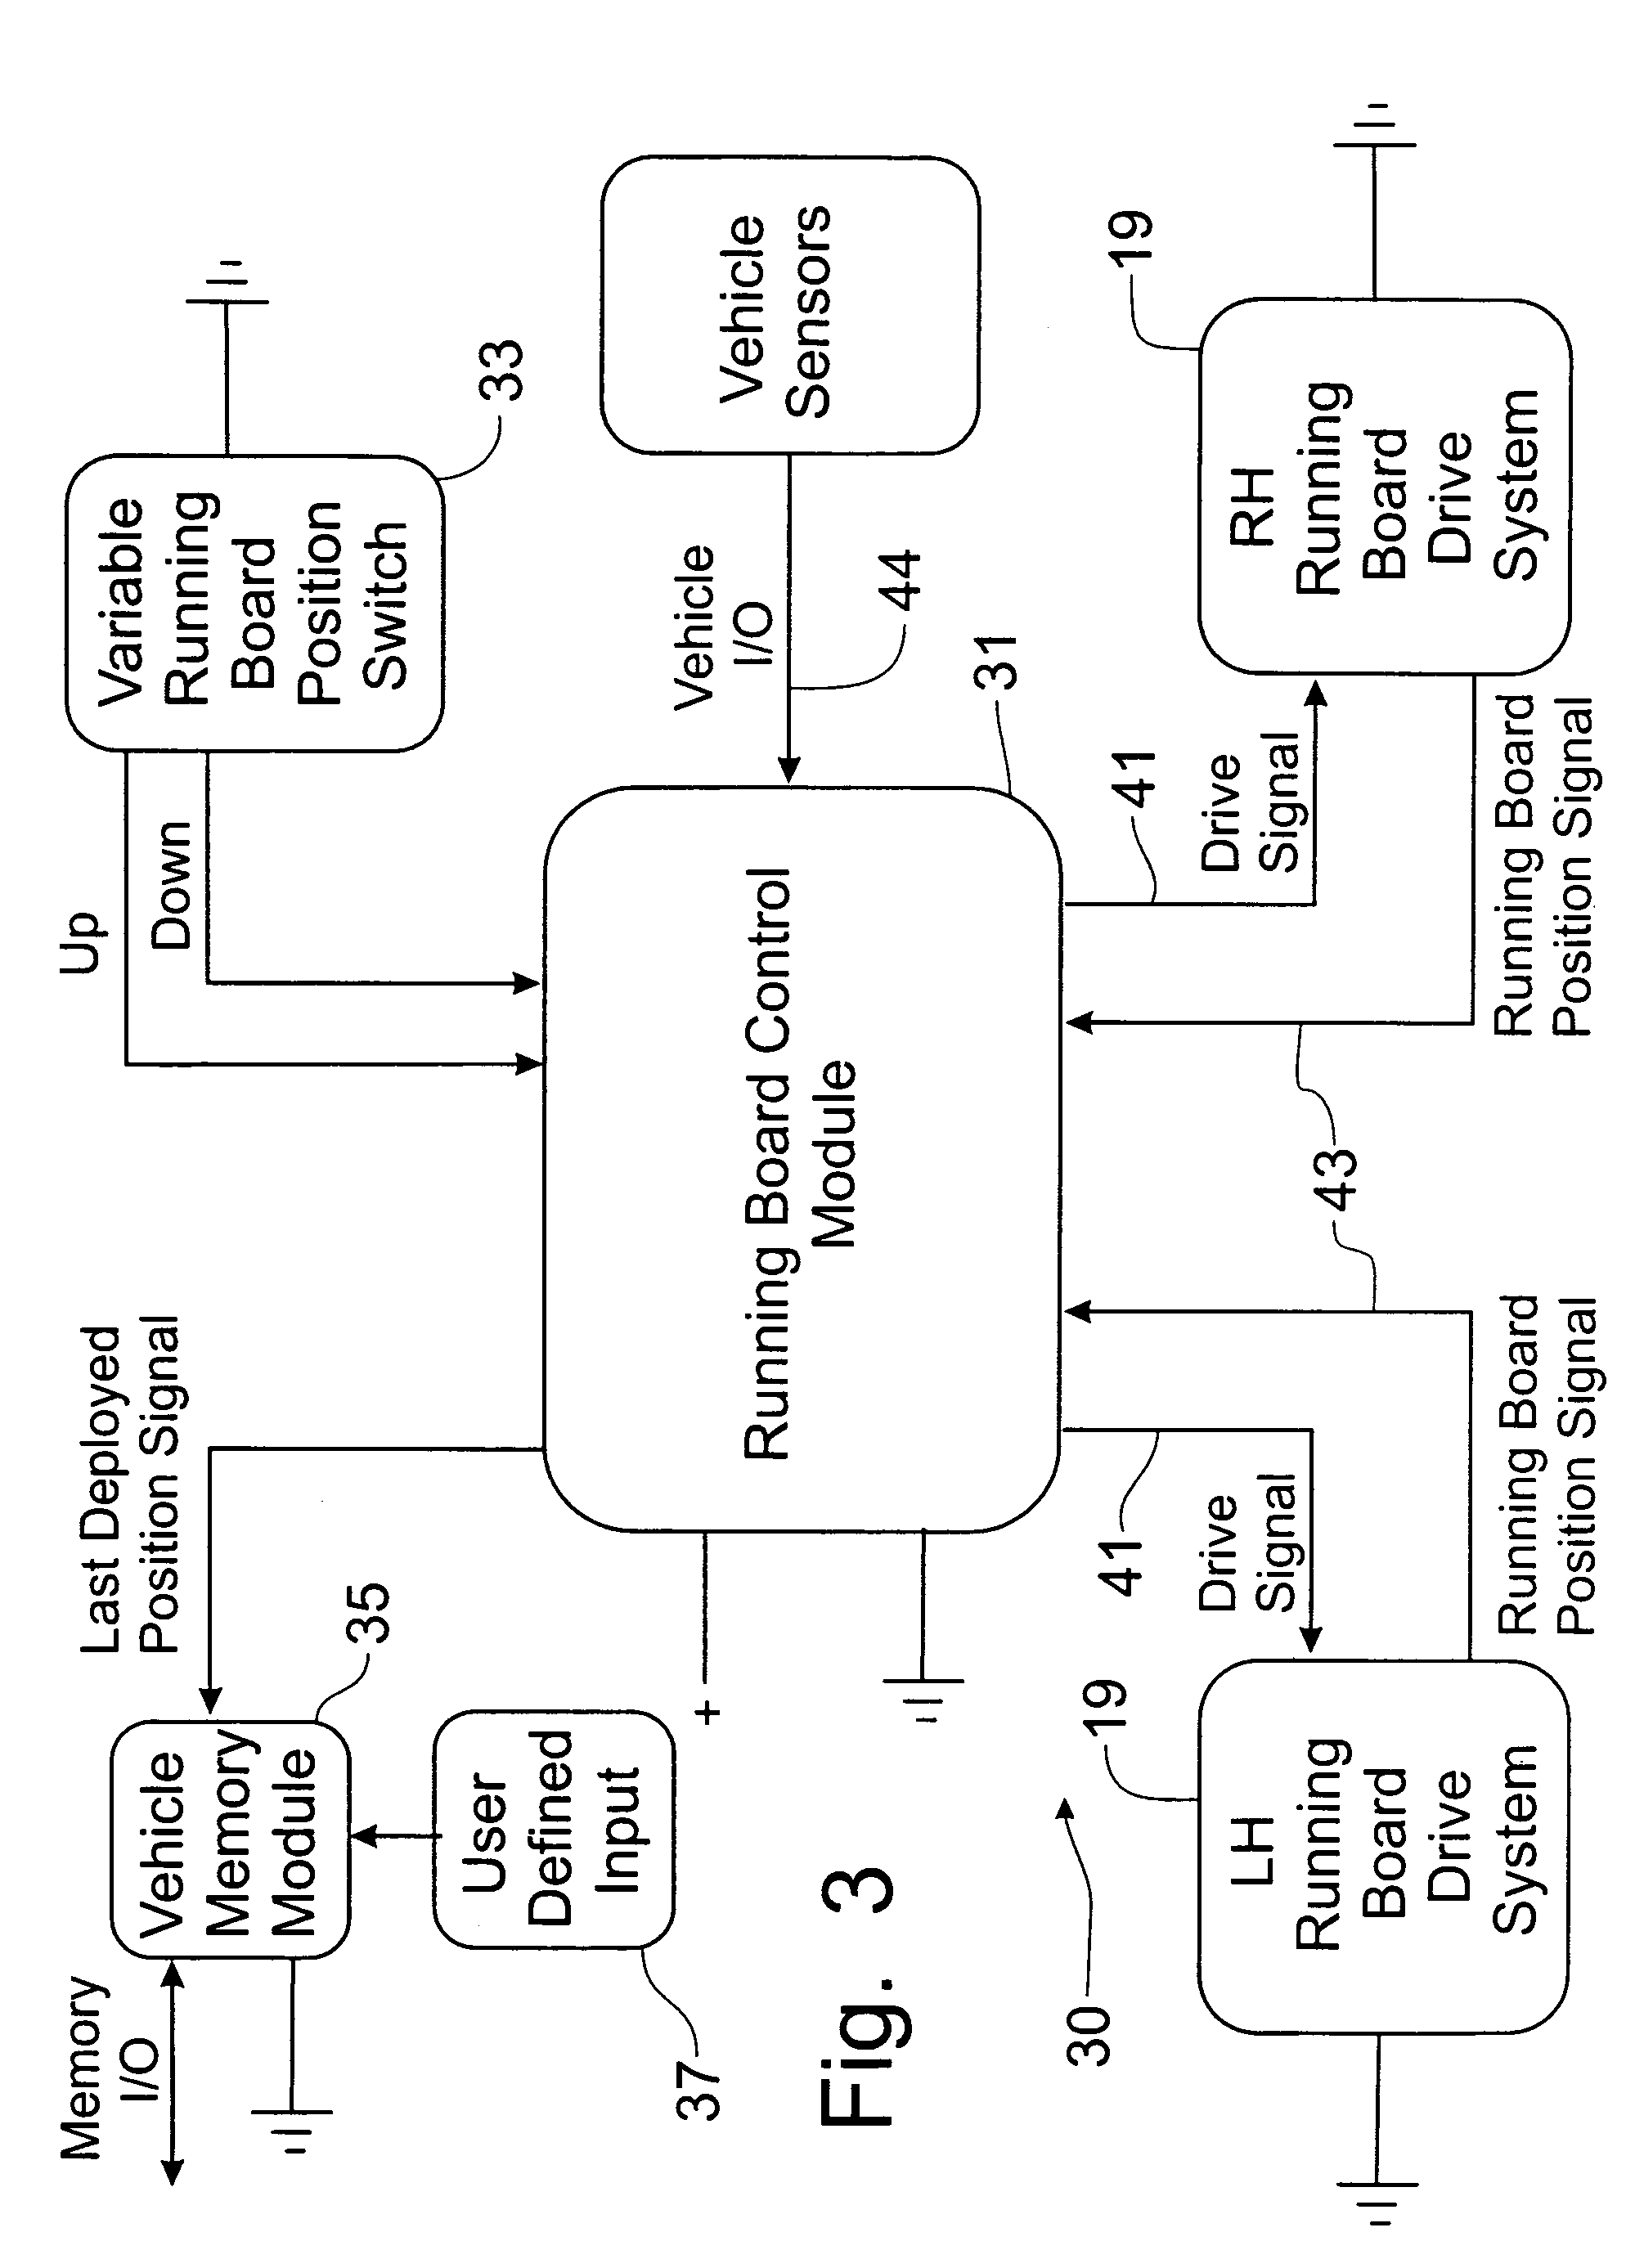 Memory function for powered running boards